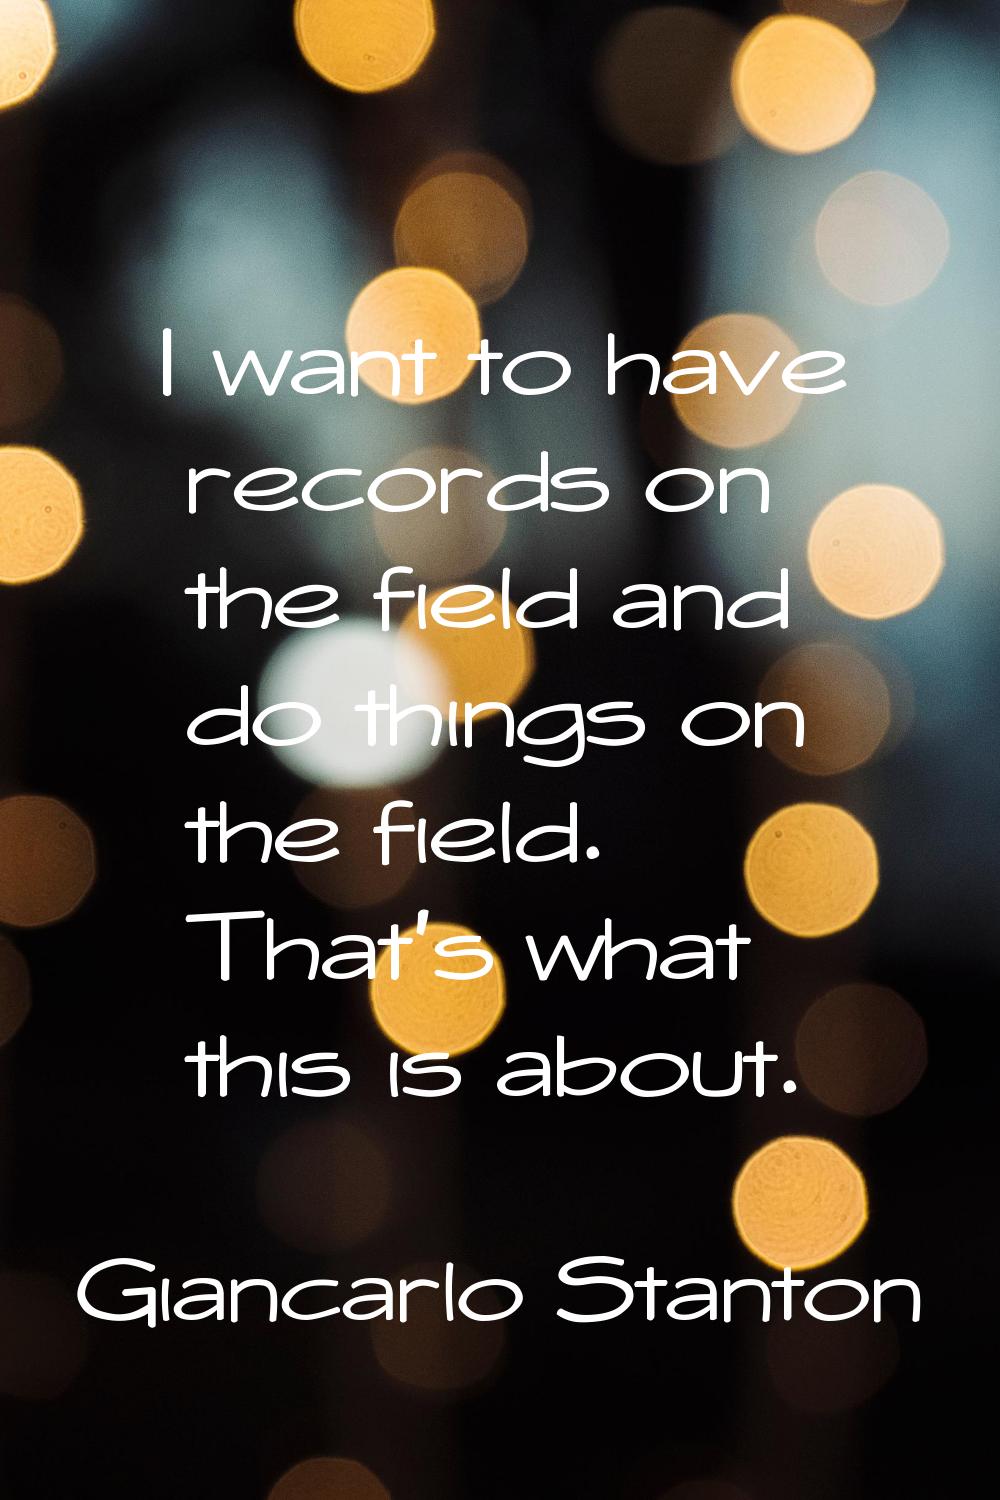 I want to have records on the field and do things on the field. That's what this is about.